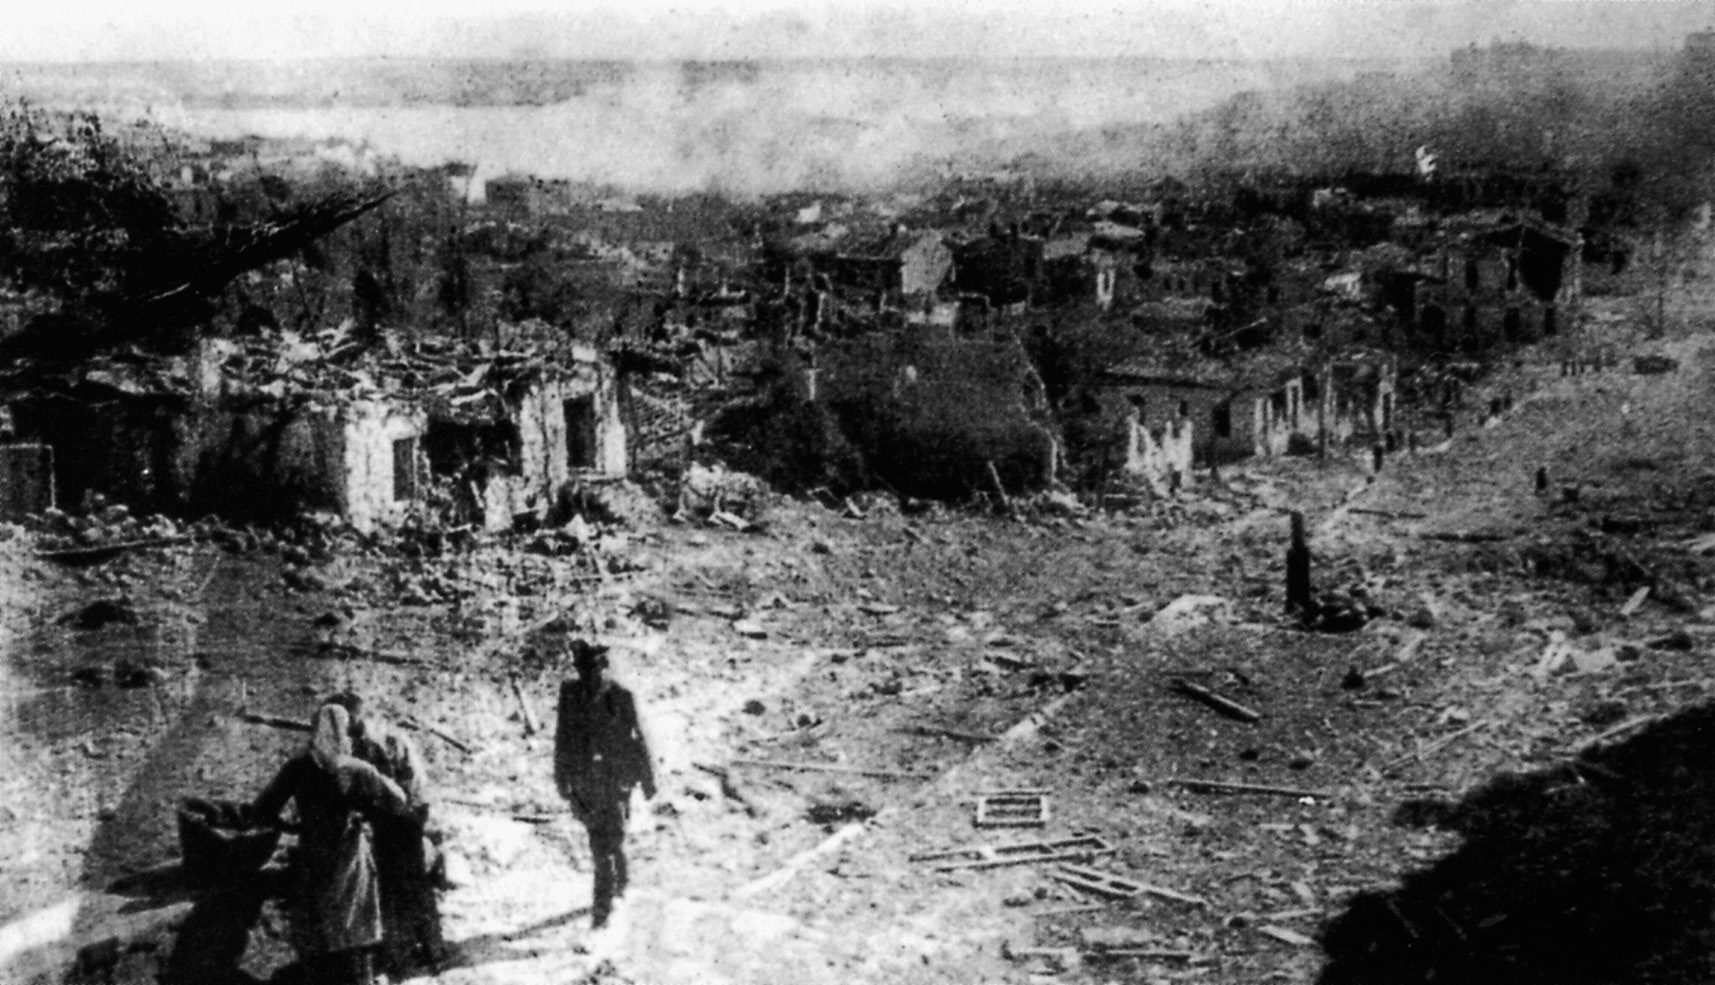 The Germans took control of Sevastopol on July 1, 1942 after heavy bombardments reduced the city to little more than a pile of rubble. 